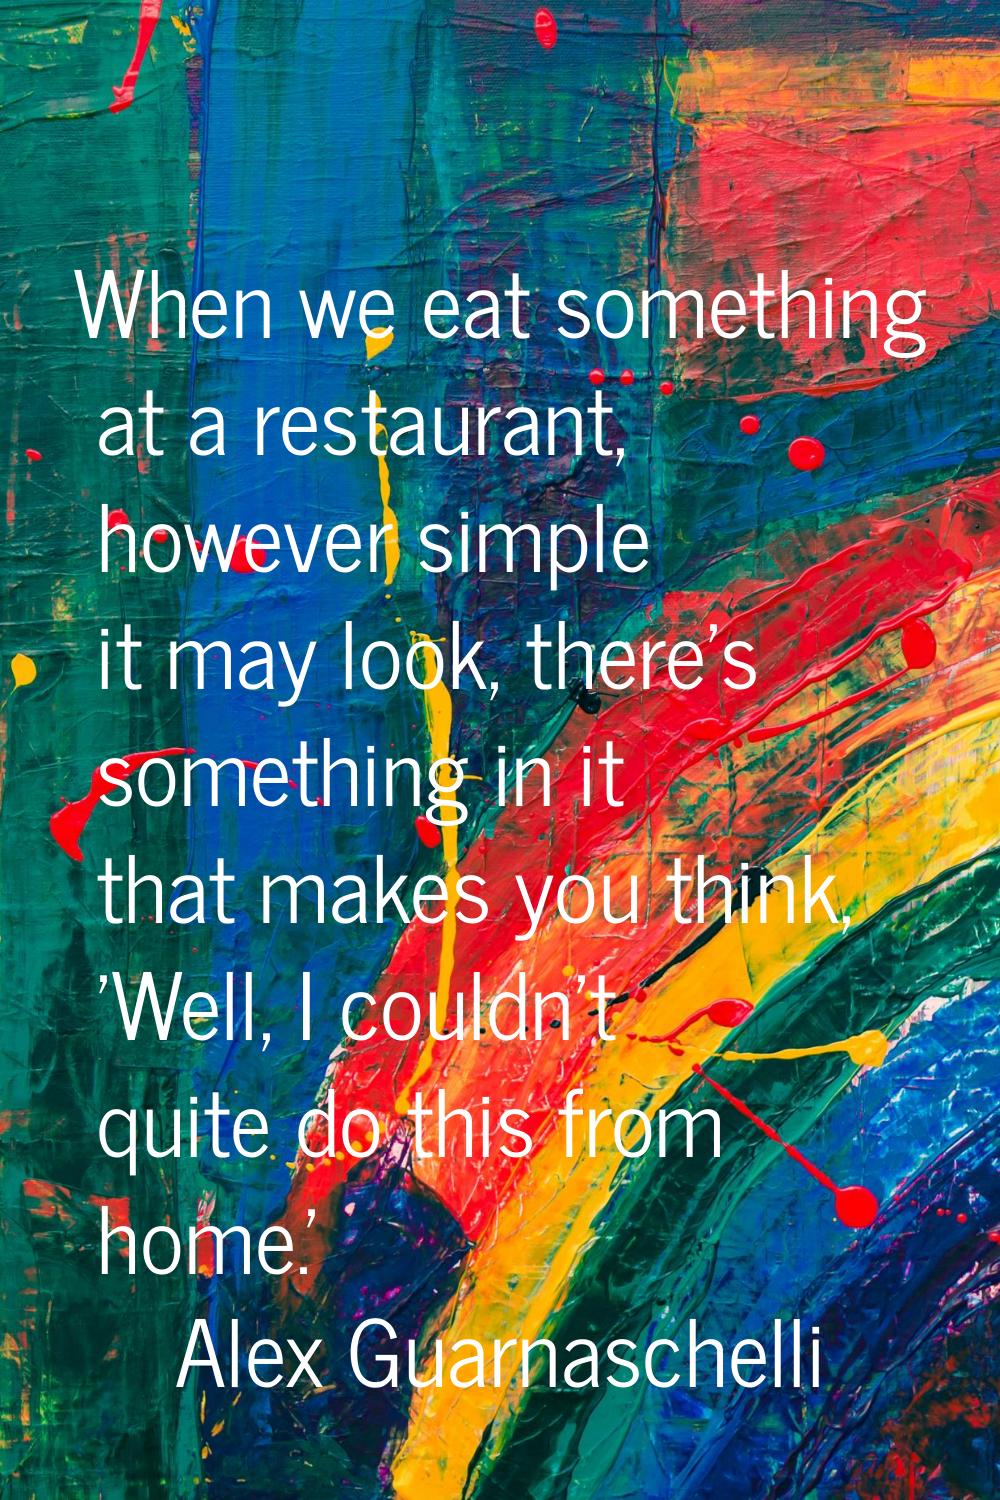 When we eat something at a restaurant, however simple it may look, there's something in it that mak